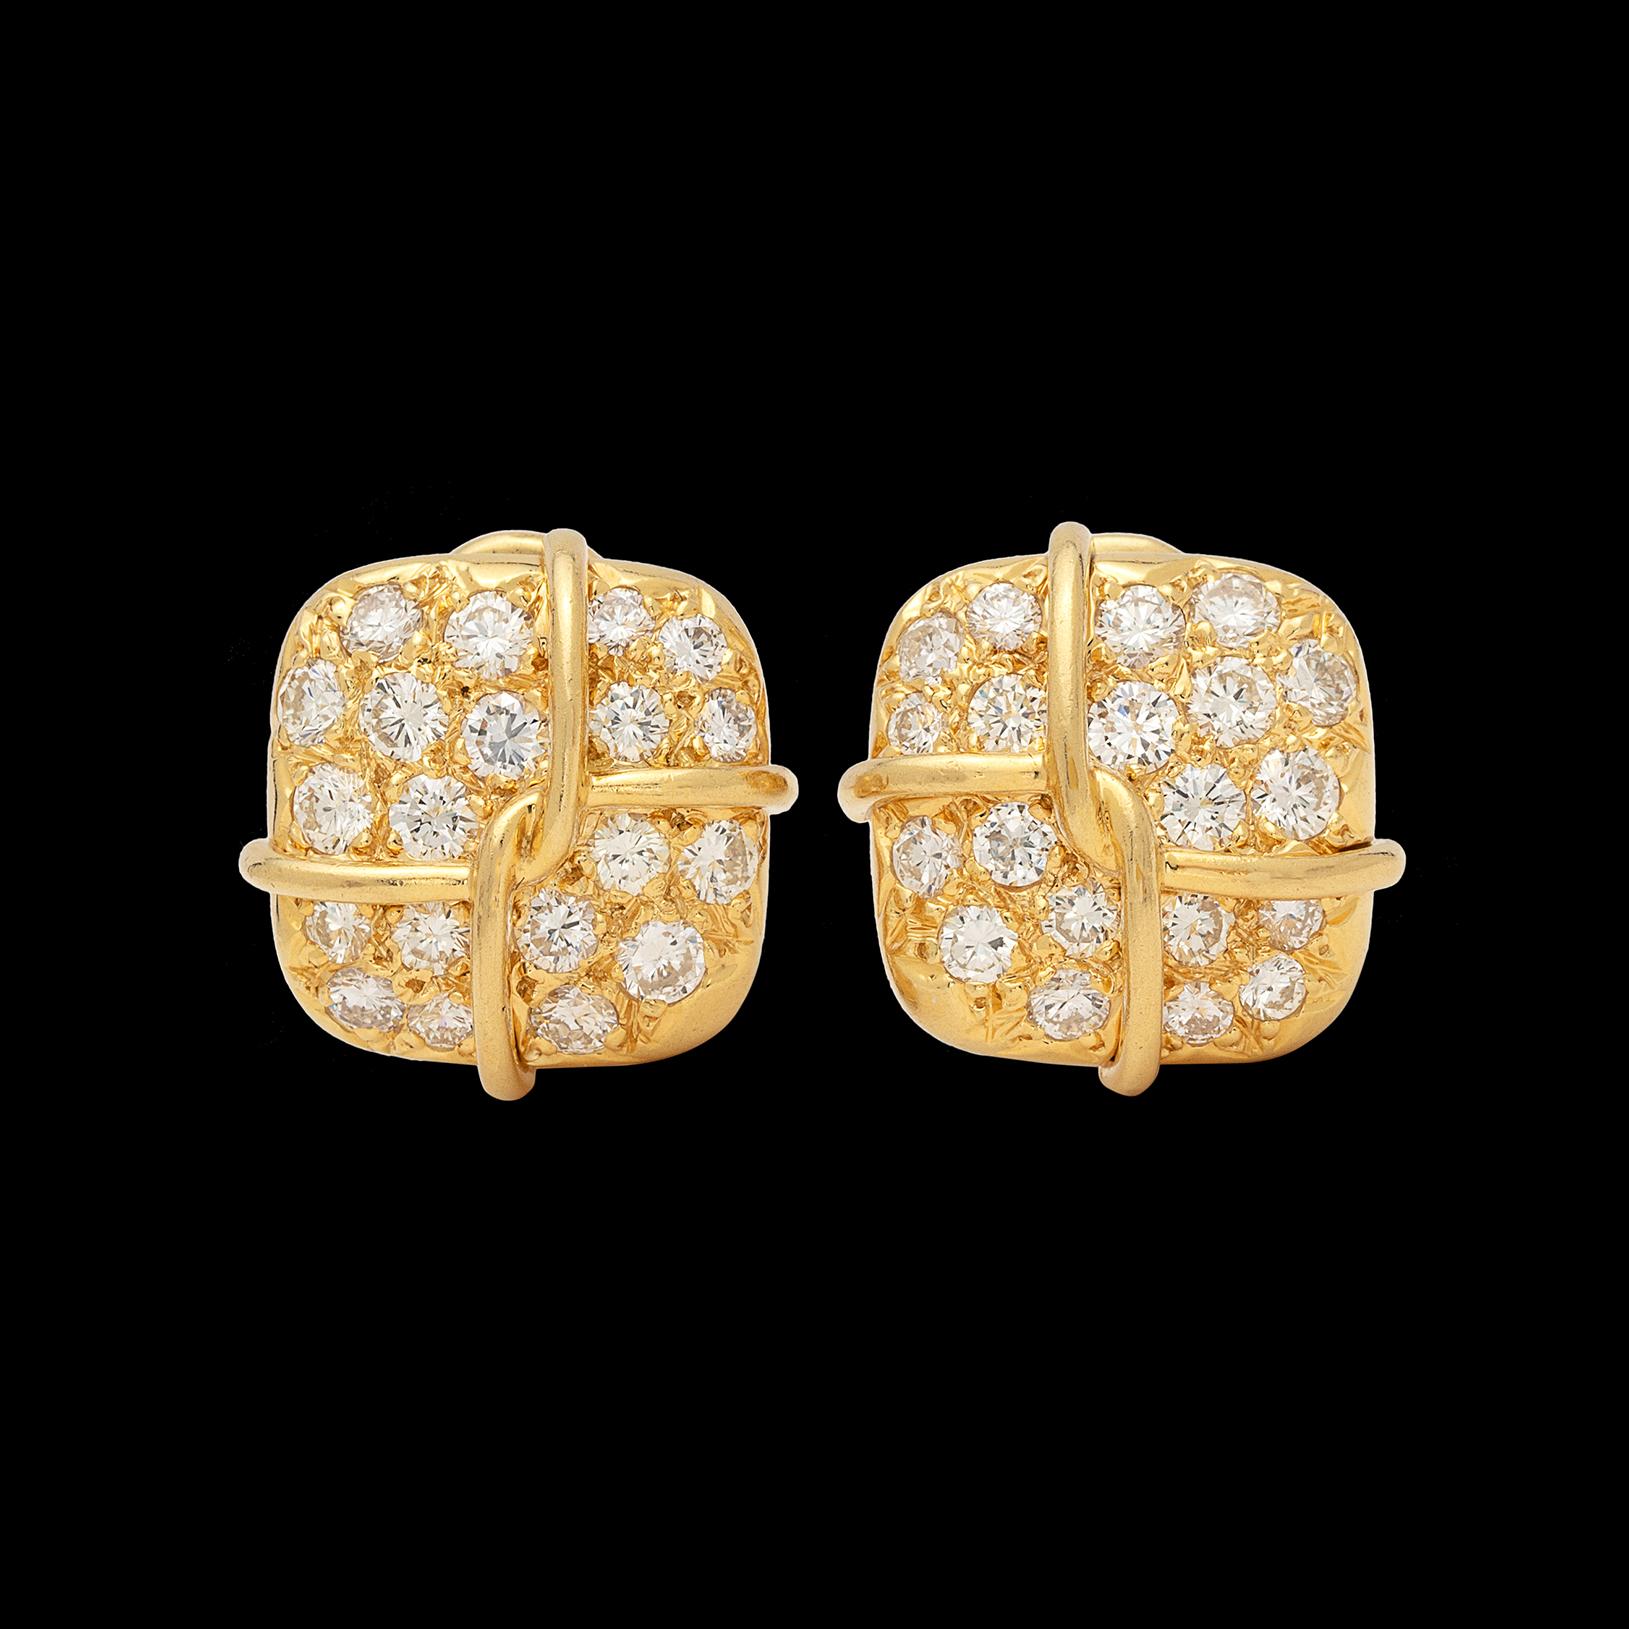 Cushion-shaped and sparkling, these Jose Hess diamond-set earrings are 1980's at their best. Pave-set with 40 round brilliant-cut diamonds totaling approximately 2.00 carats, the earrings weigh 12.8 grams and measure 1/2in. Perfect for everyday